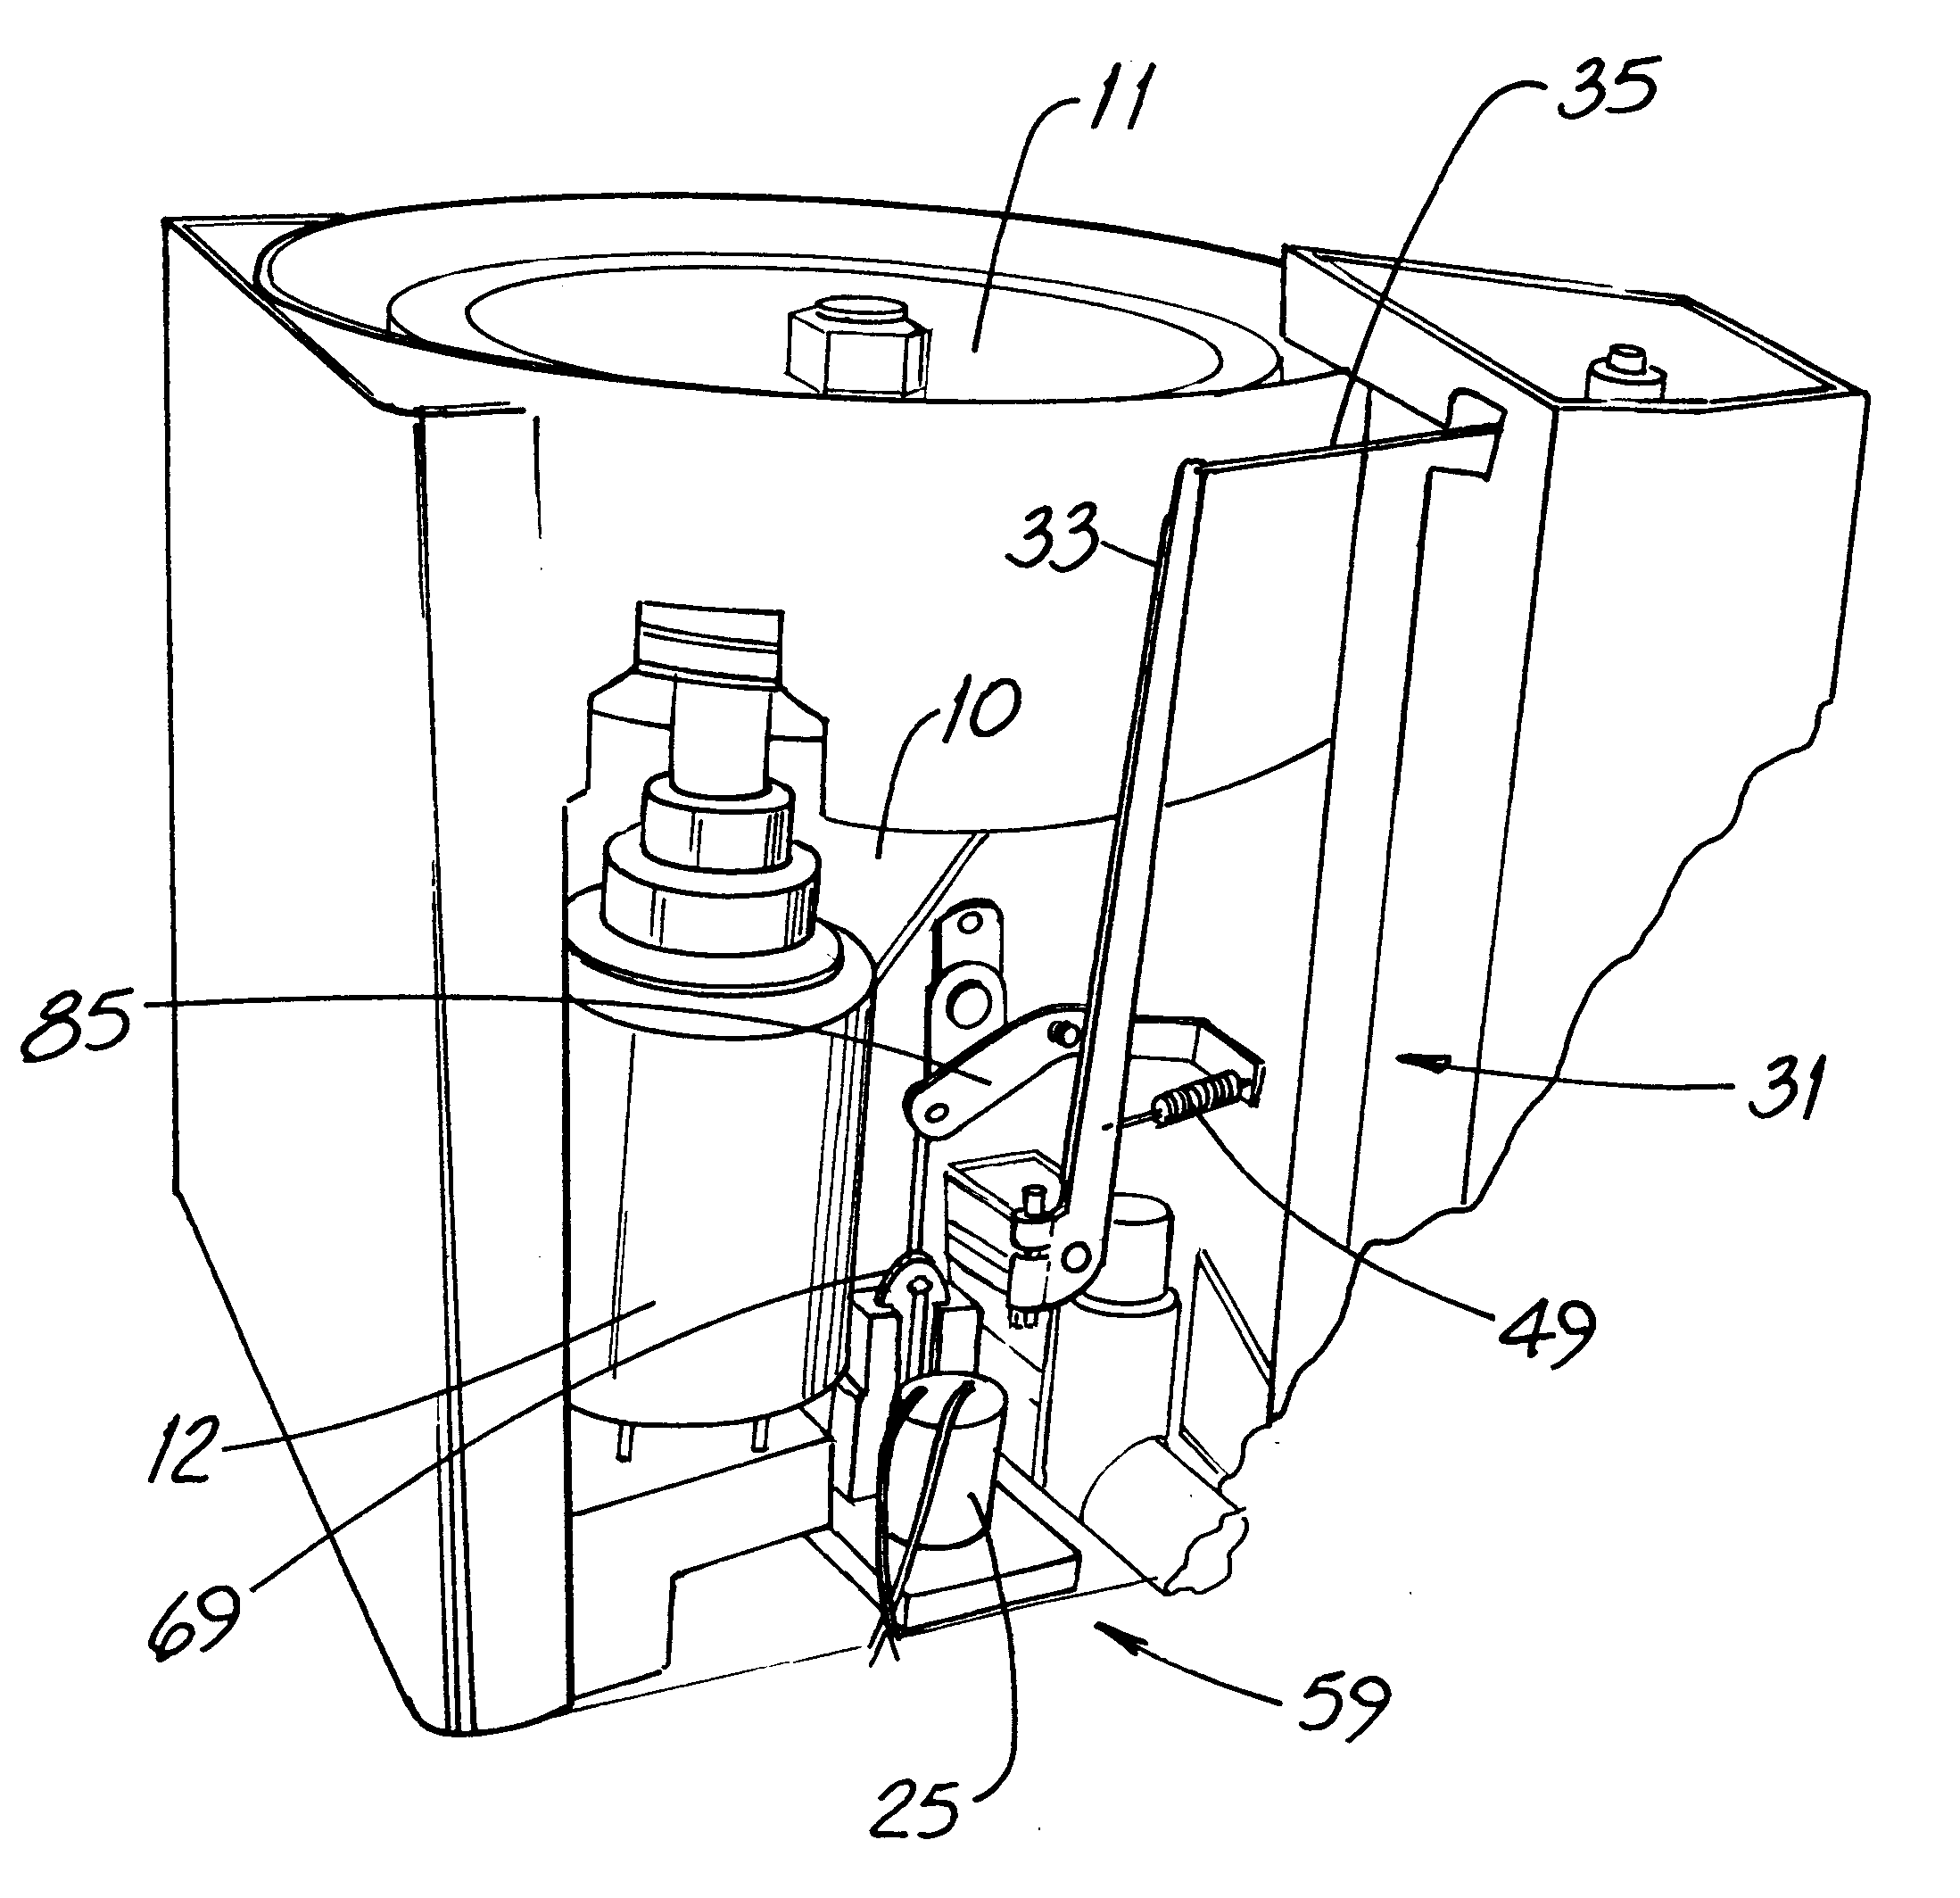 Apparatus and method for positioning an engine throttle